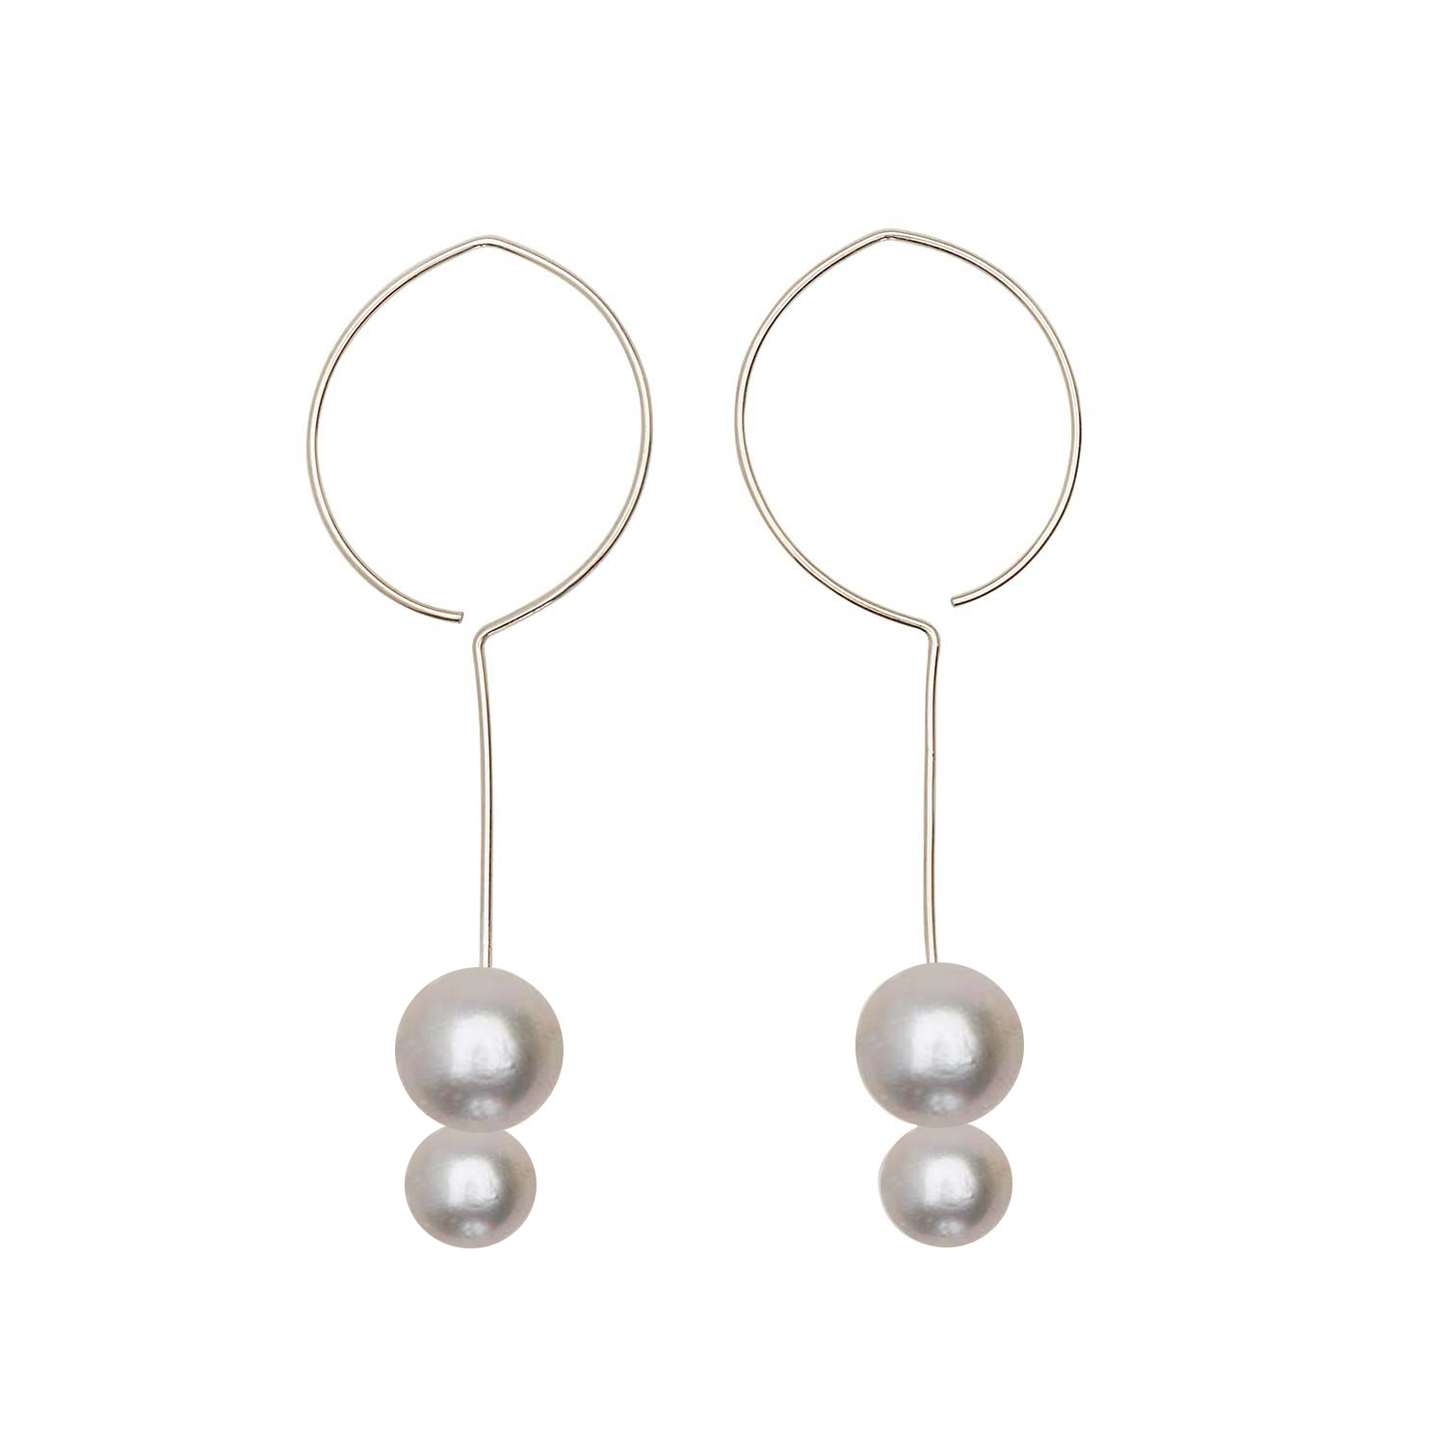 Long Round Drop Earrings with Round Freshwater Pearls